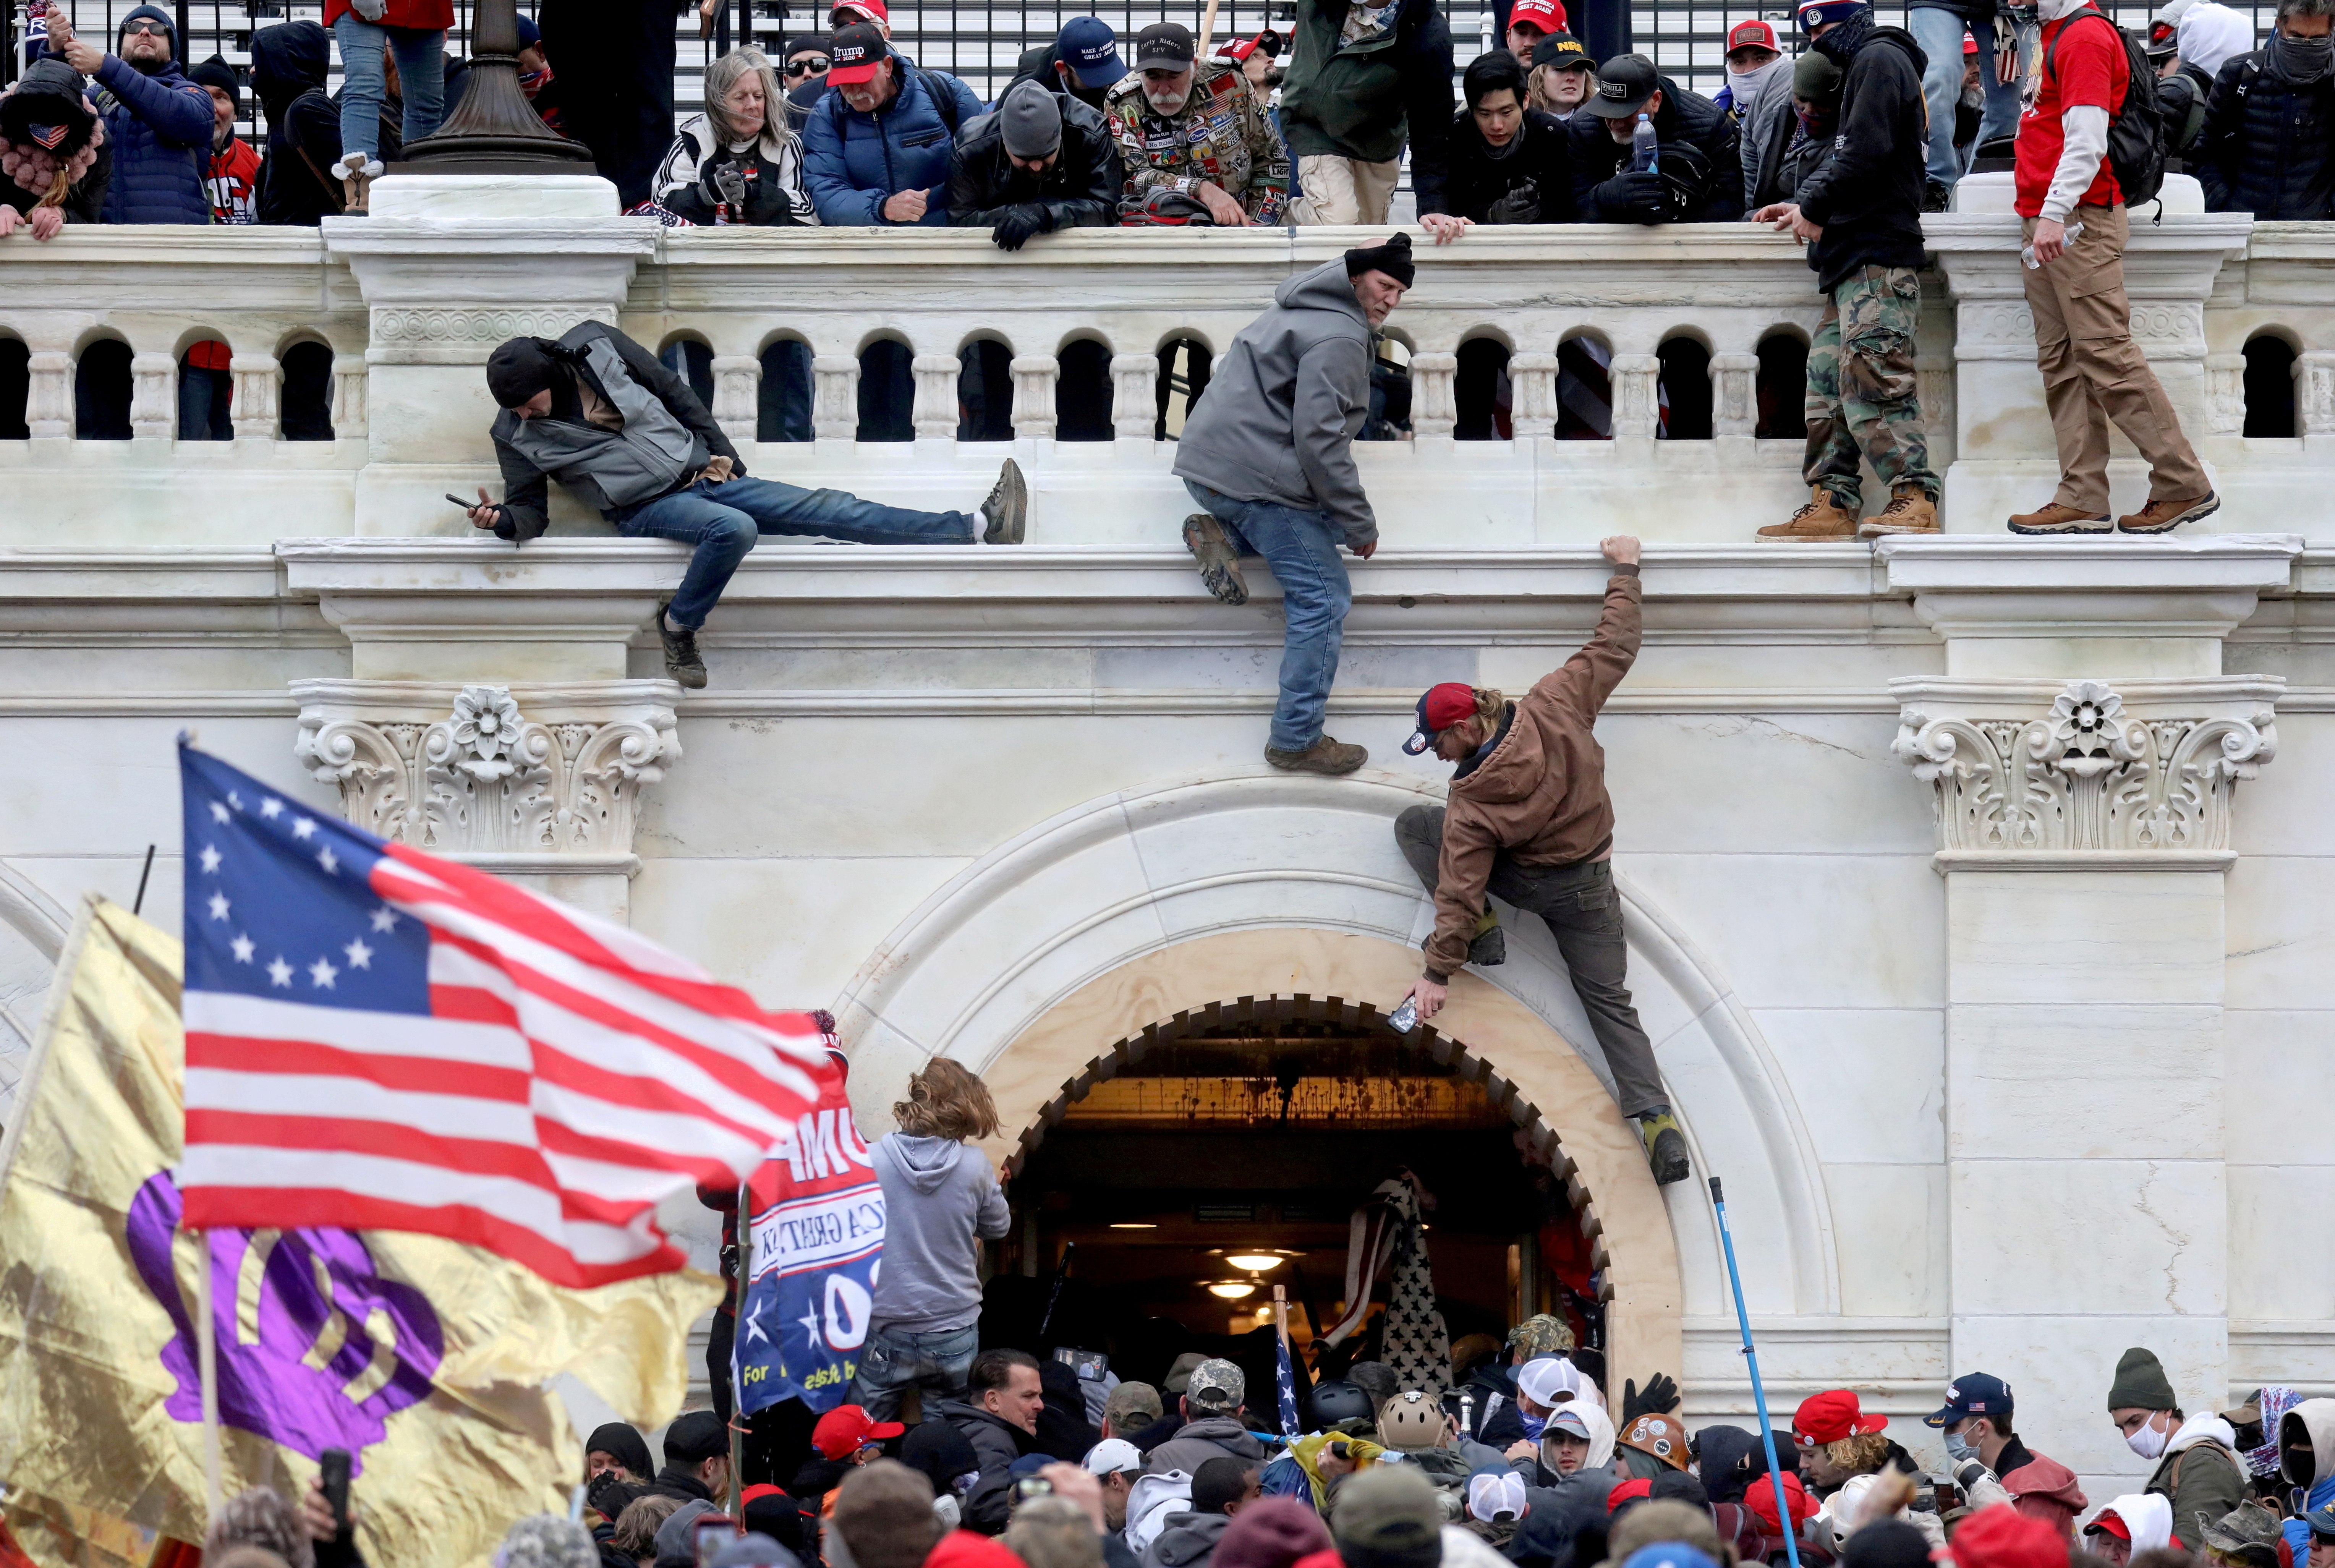 File photo: A mob of supporters of U.S. President Donald Trump fight with members of law enforcement at a door they broke open as they storm the U.S. Capitol Building in Washington, U.S. REUTERS/Leah Millis